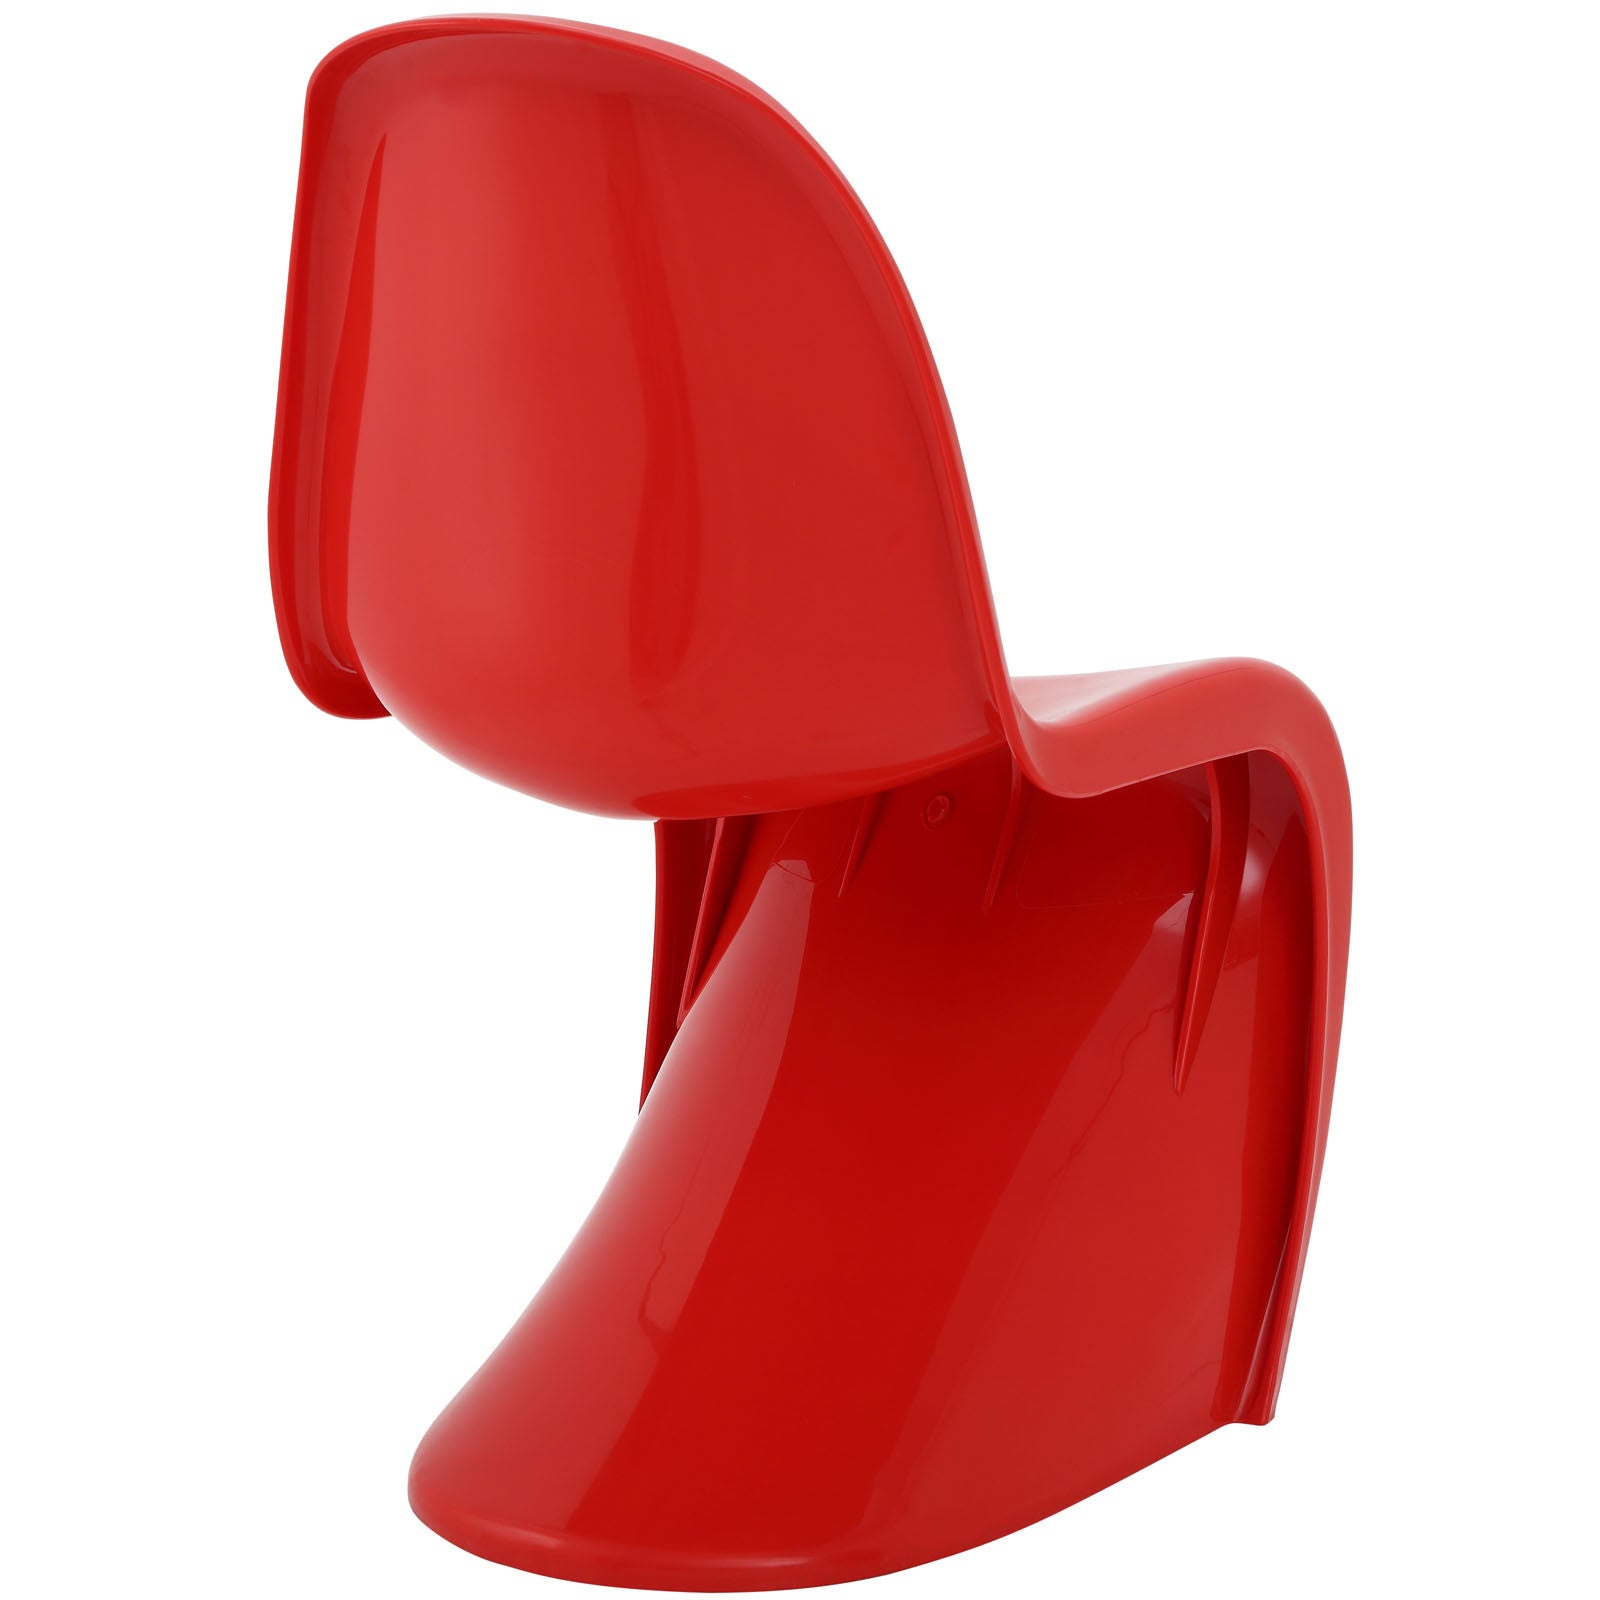 Slide Side Chair Red